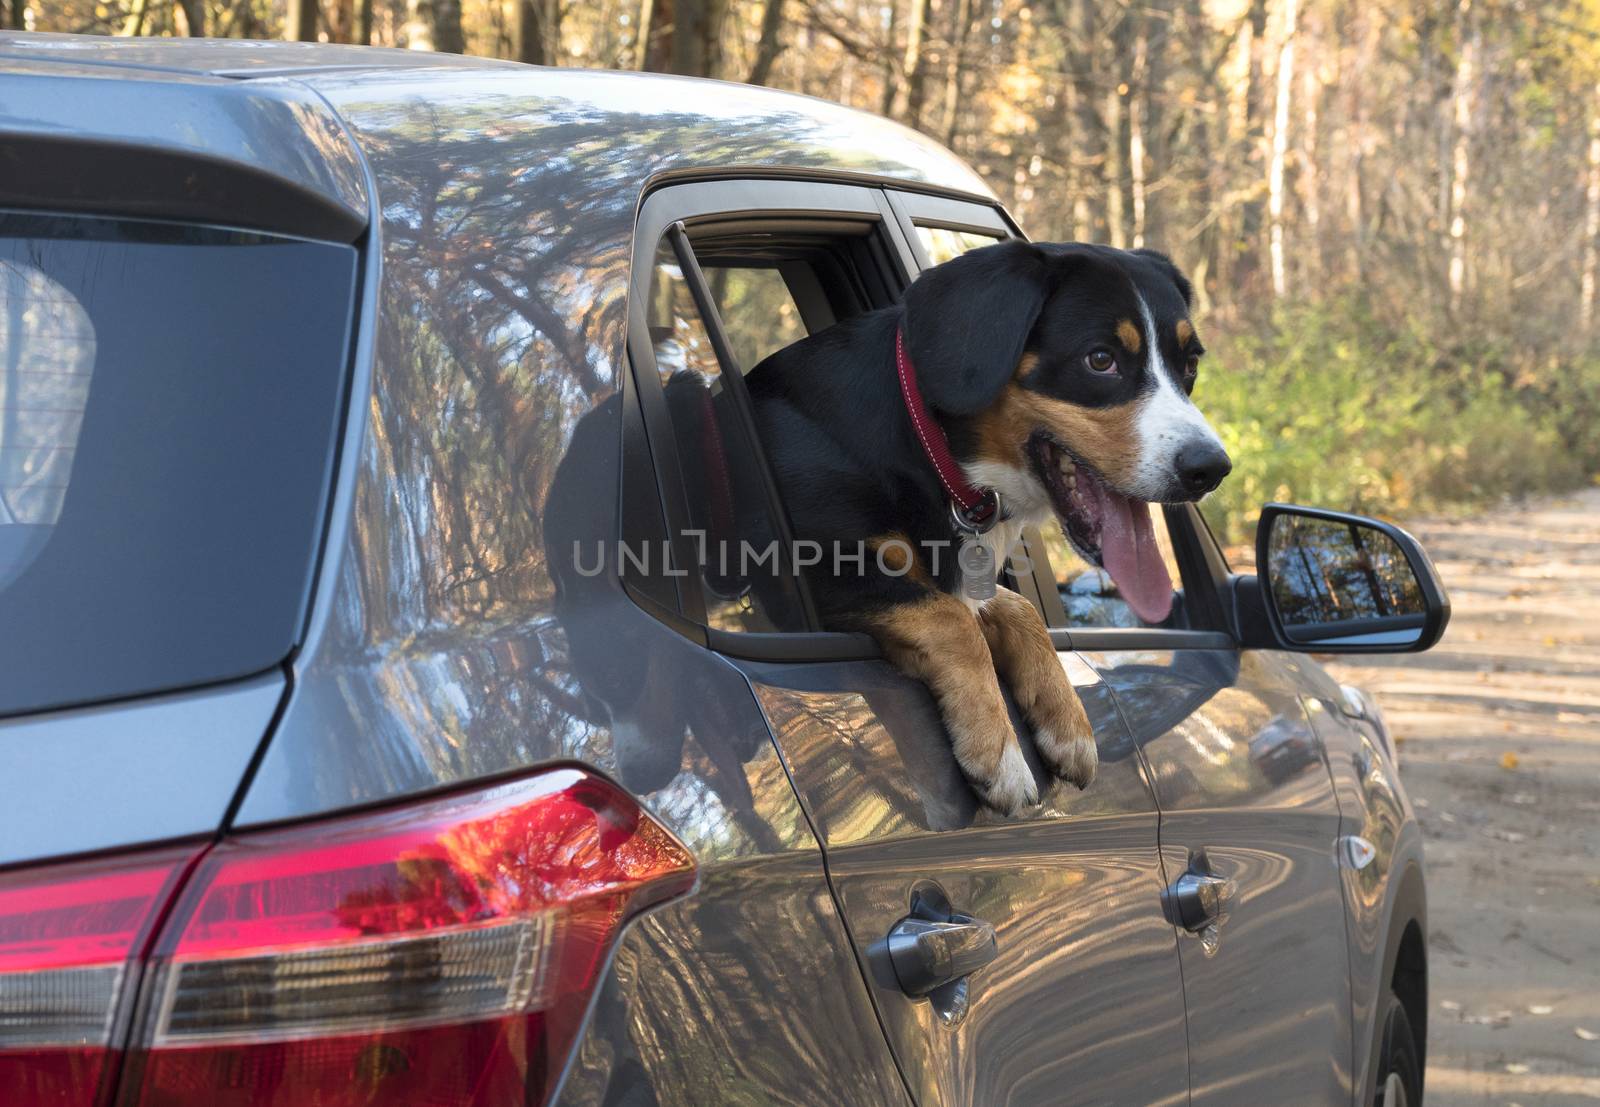 Entlebucher Mountain Dog looks out of the car window.